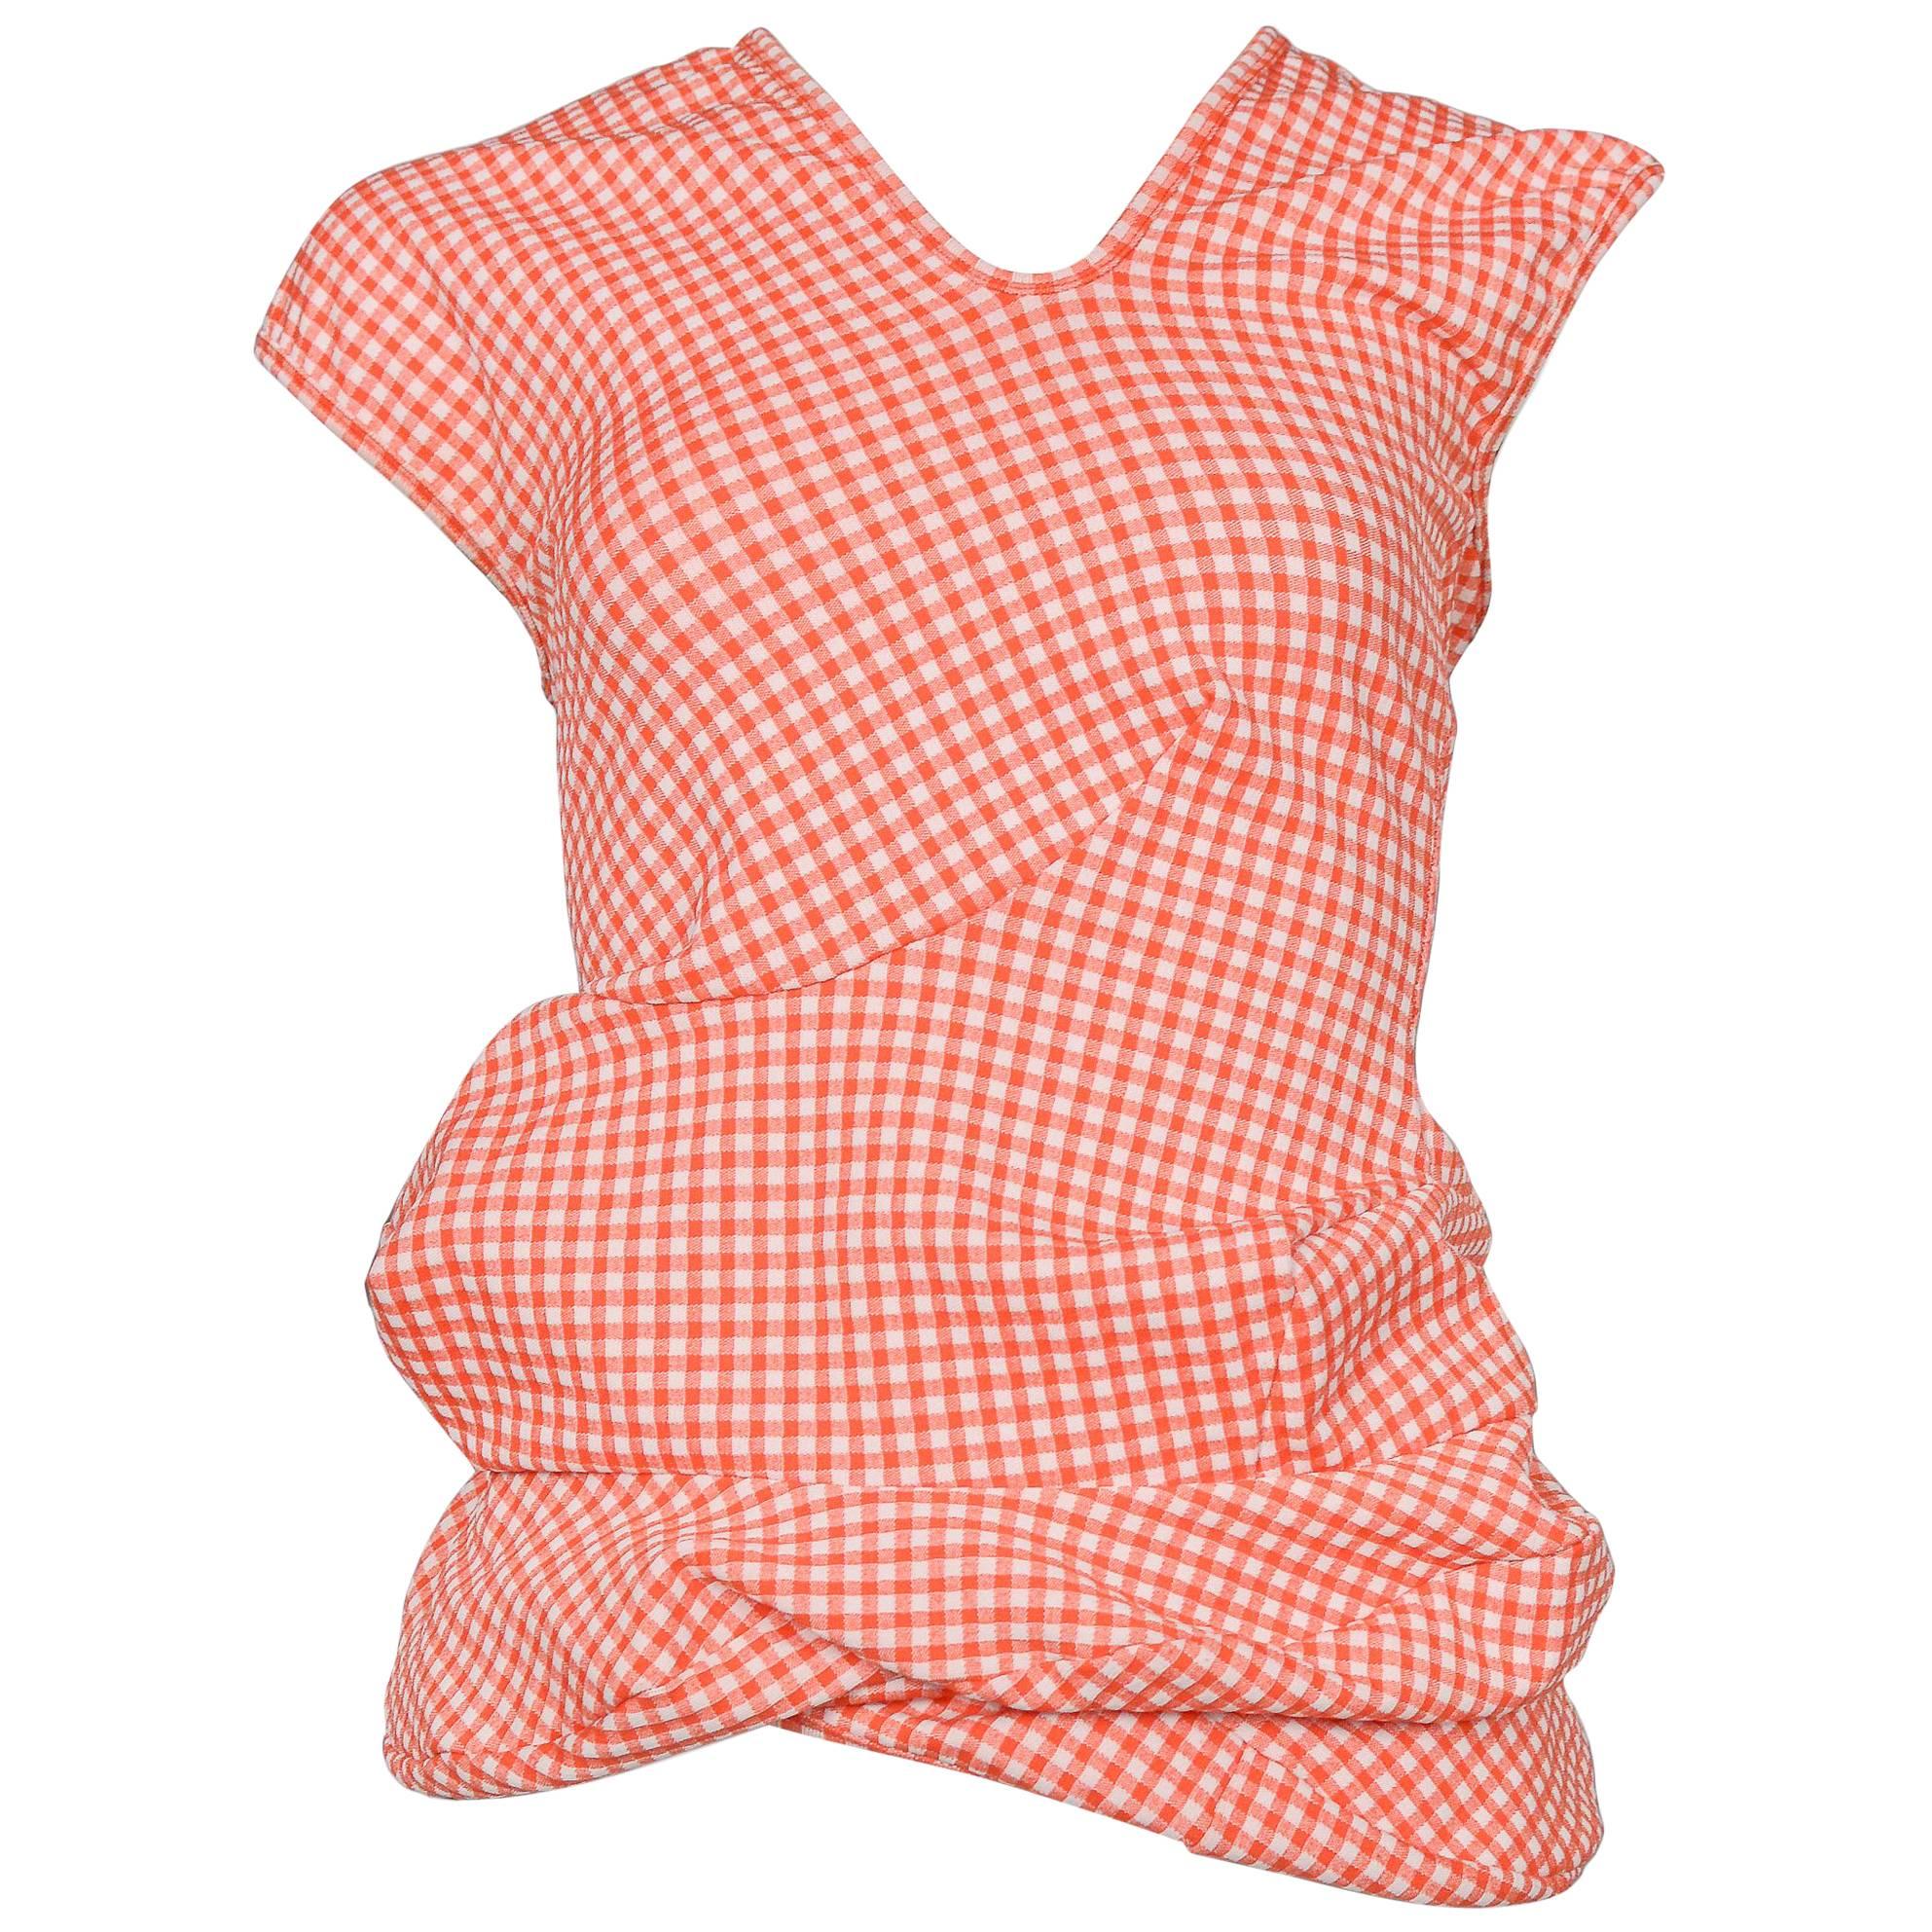 Museum Quality Comme des Garcons Lumps & Bumps SS 1997 Red Gingham Top For Sale